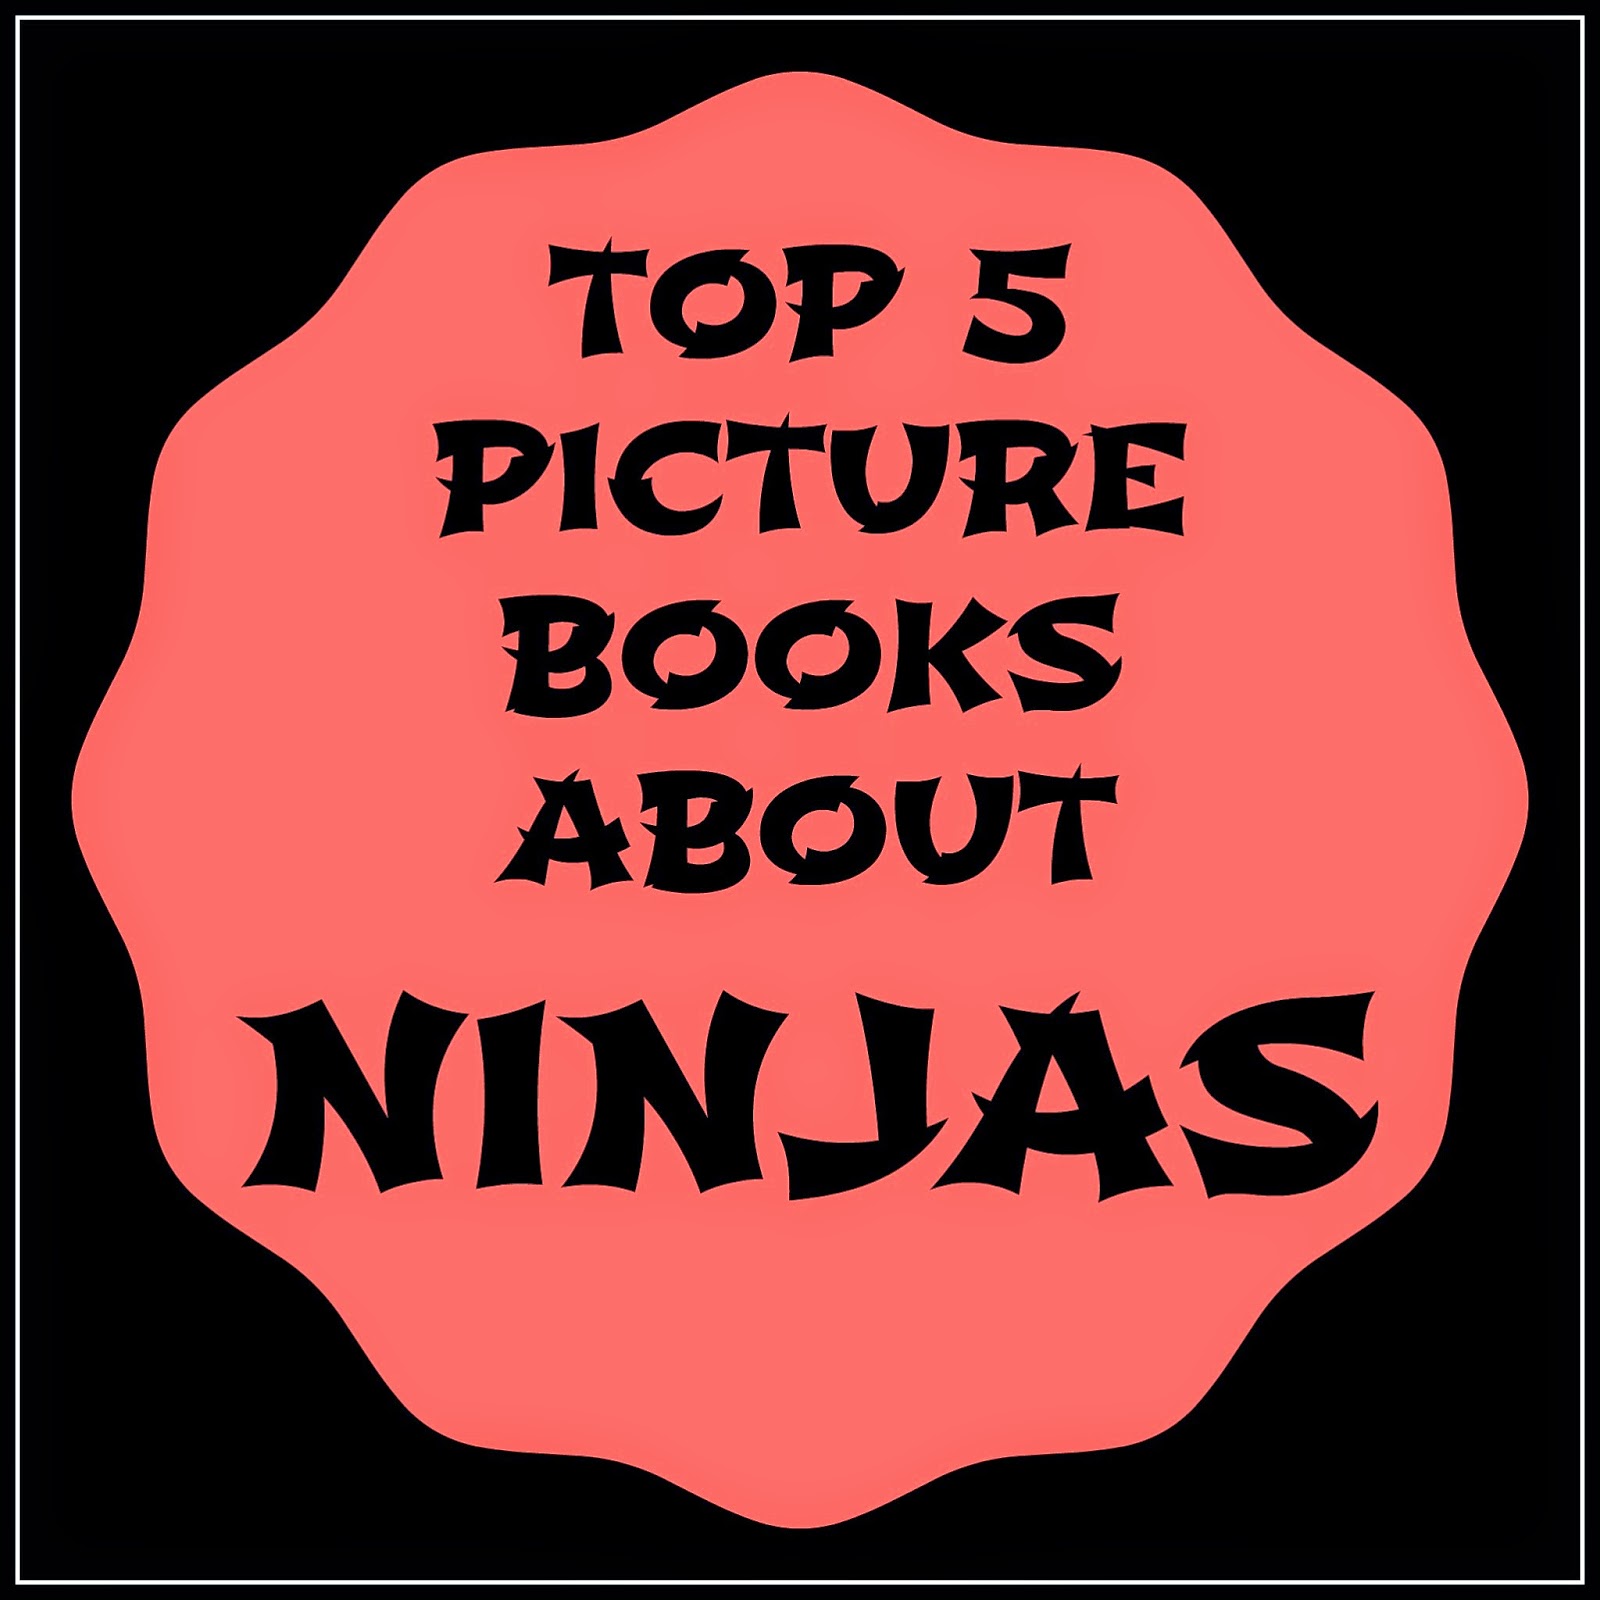 Top 5 Picture Books about Ninjas